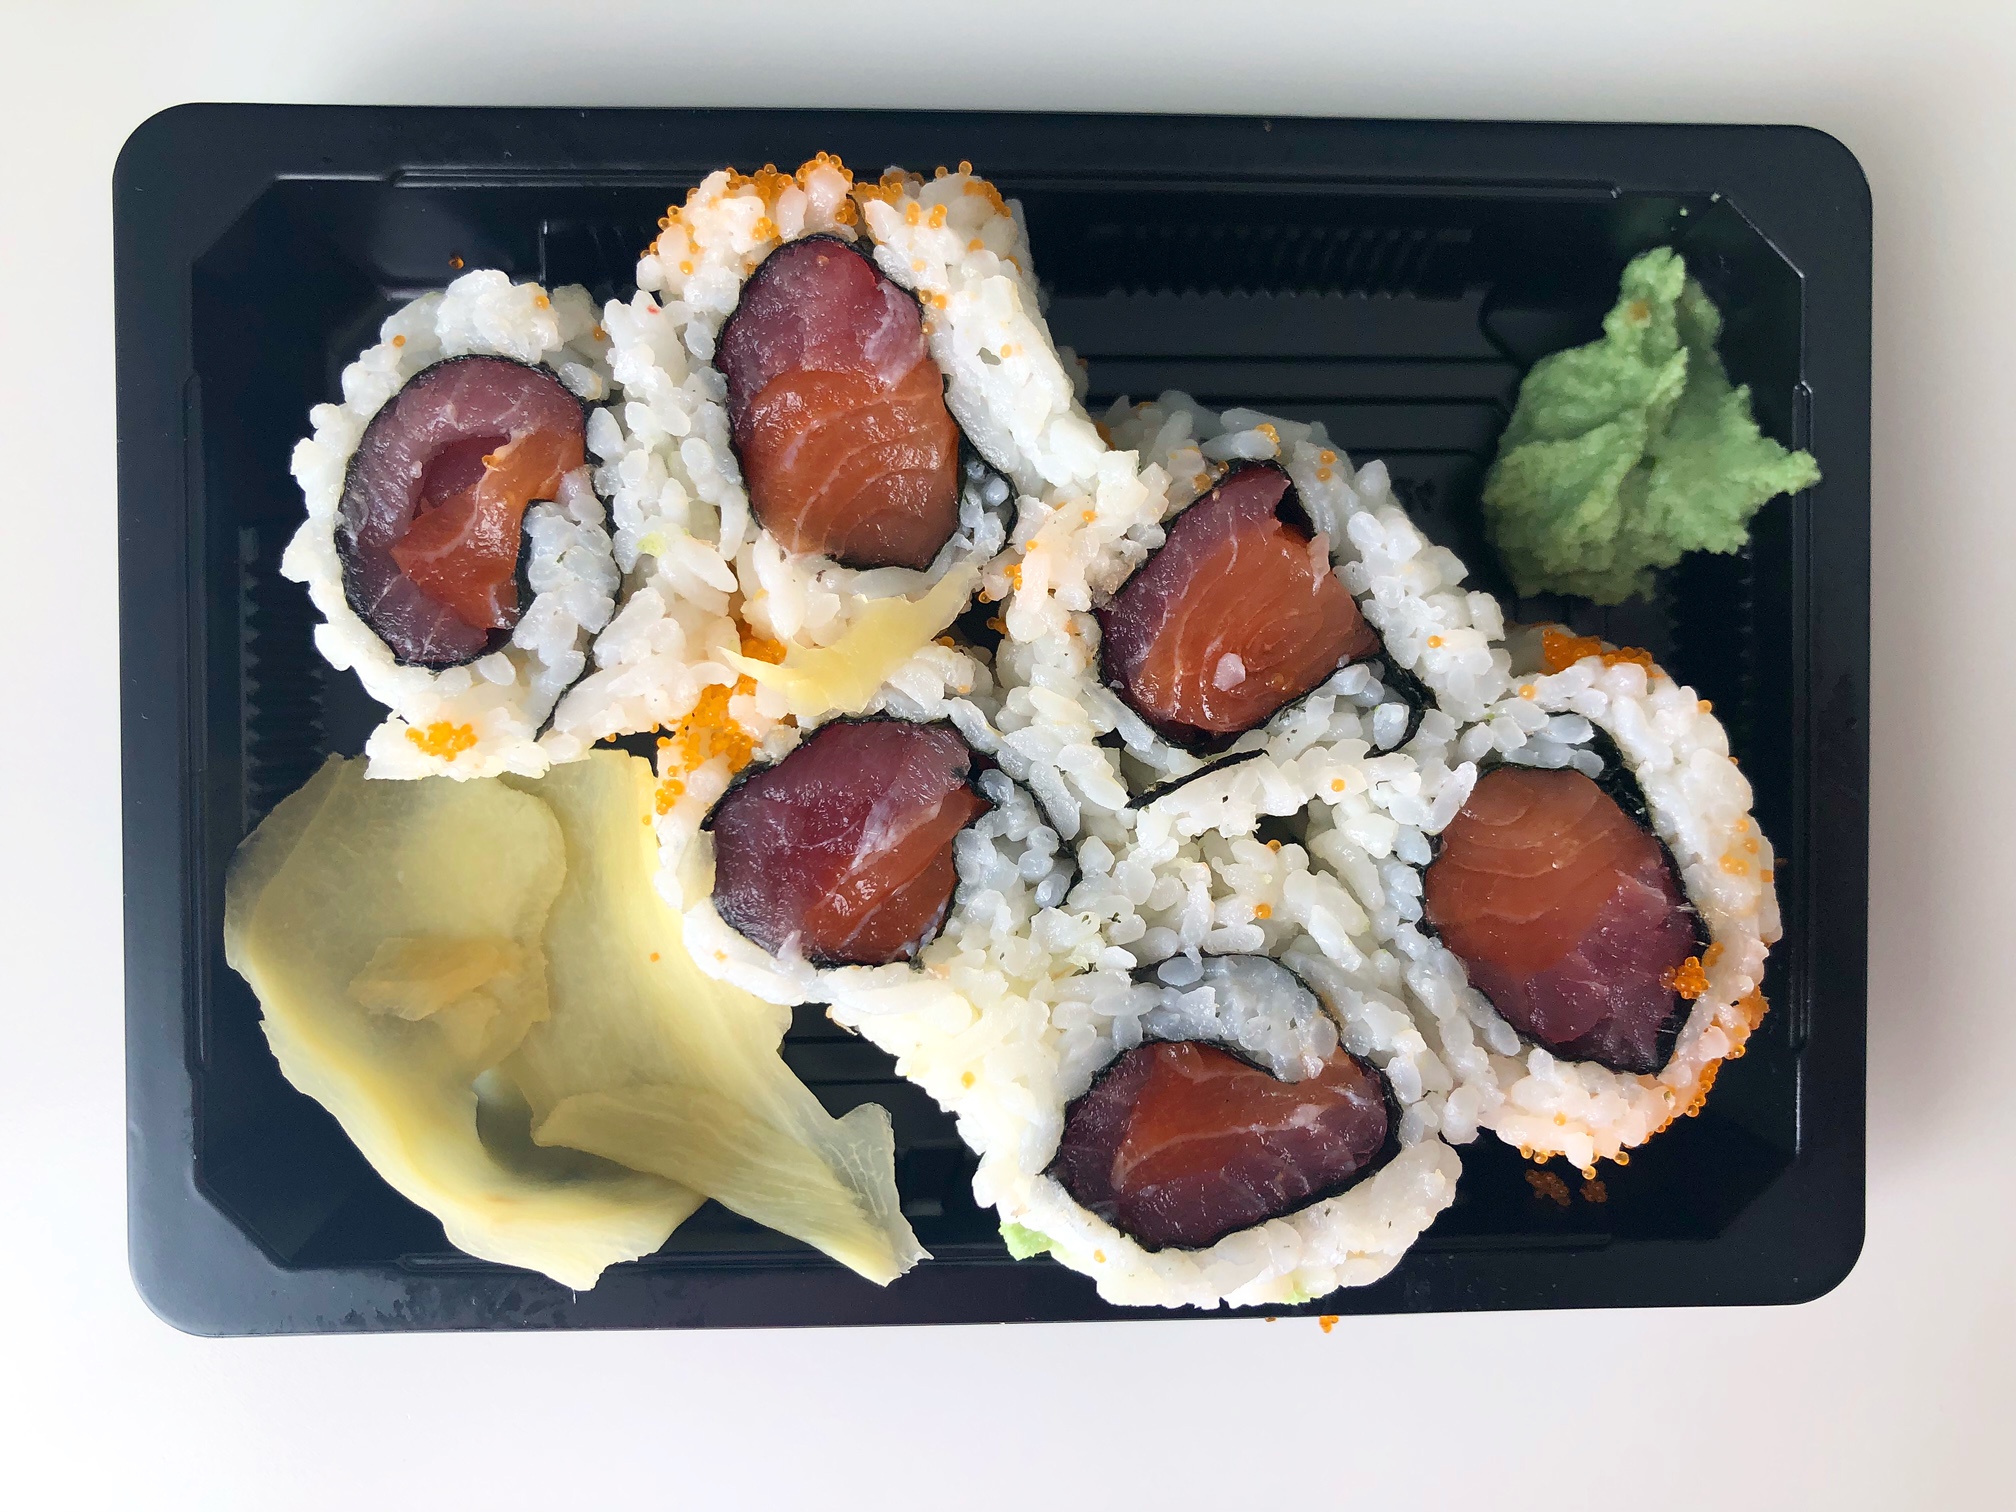 An overhead photo of the New York roll from Sushi Ichiban in a black plastic takeout container with ginger and wasabi. The roll has two pink fish wrapped inside seaweed with white rice and orange fish eggs outside. Photo by Alyssa Buckley.